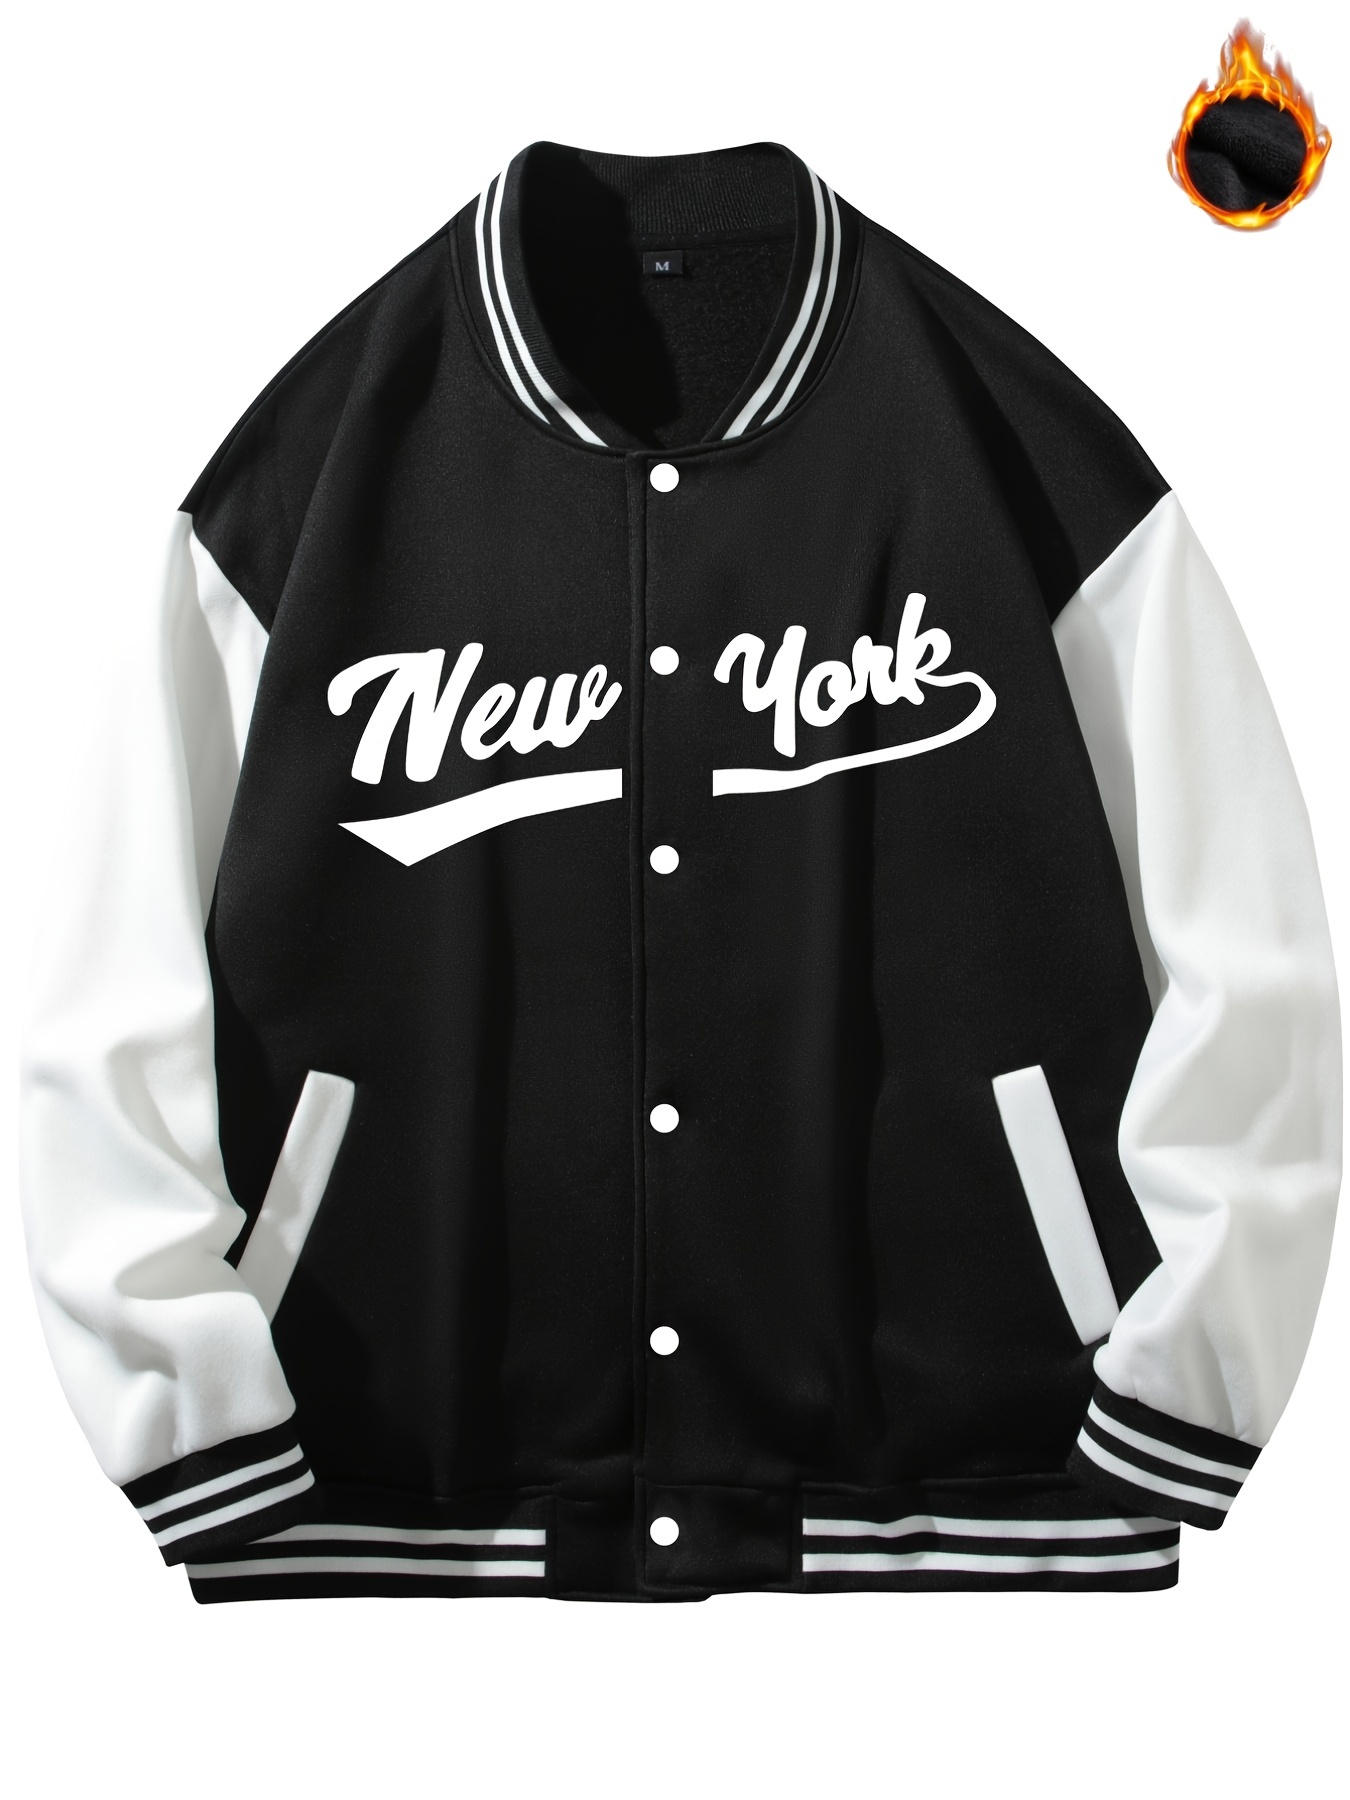  MLB Fleece New York Yankees Blocks Blue/Red/White, Fabric by  the Yard : Sports & Outdoors